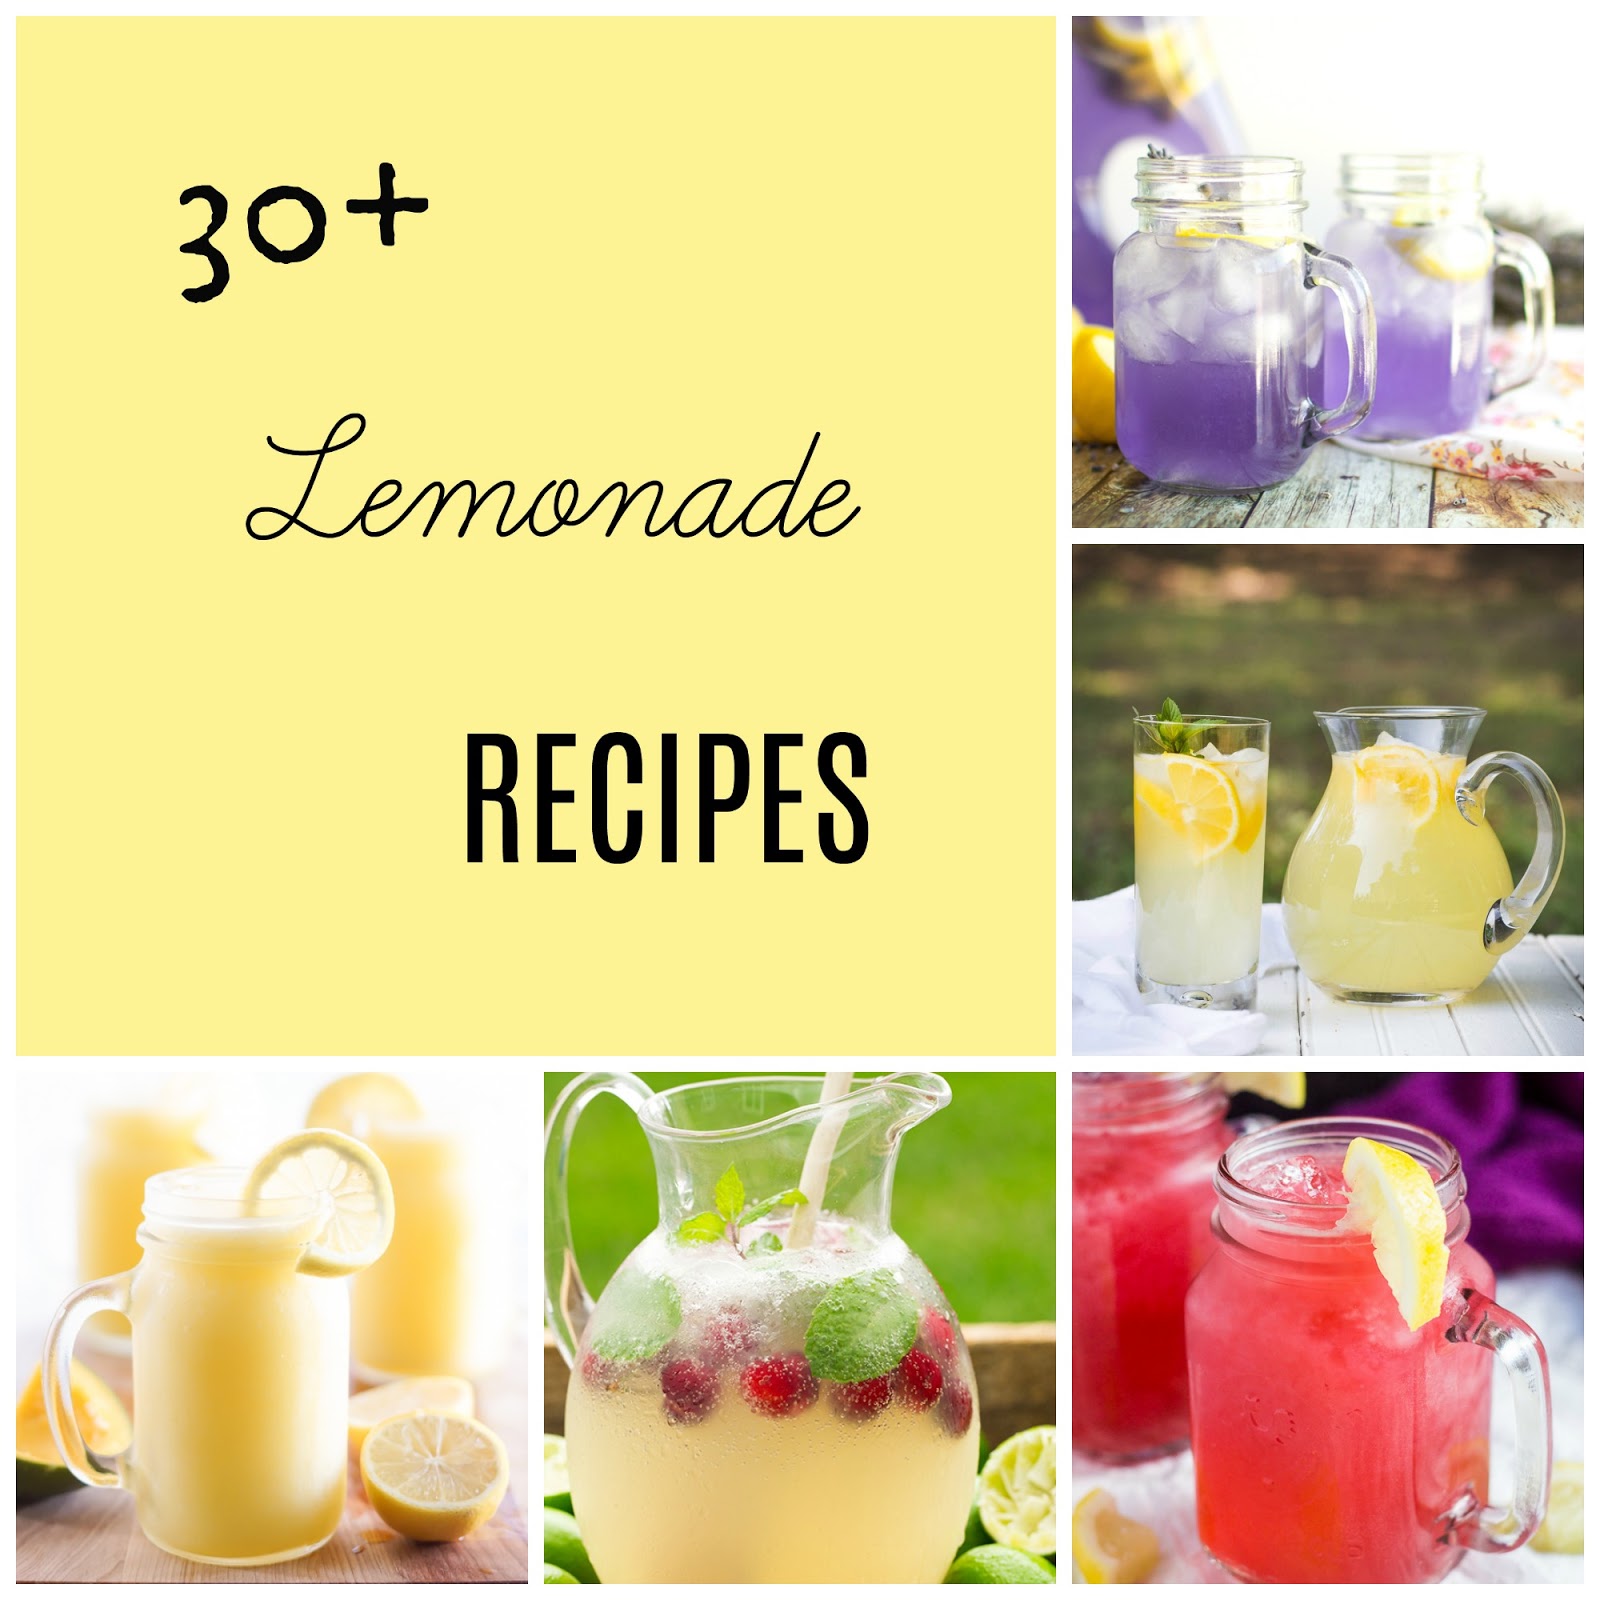 Enjoy this broad variety of sweet and refreshing drinks this summer!